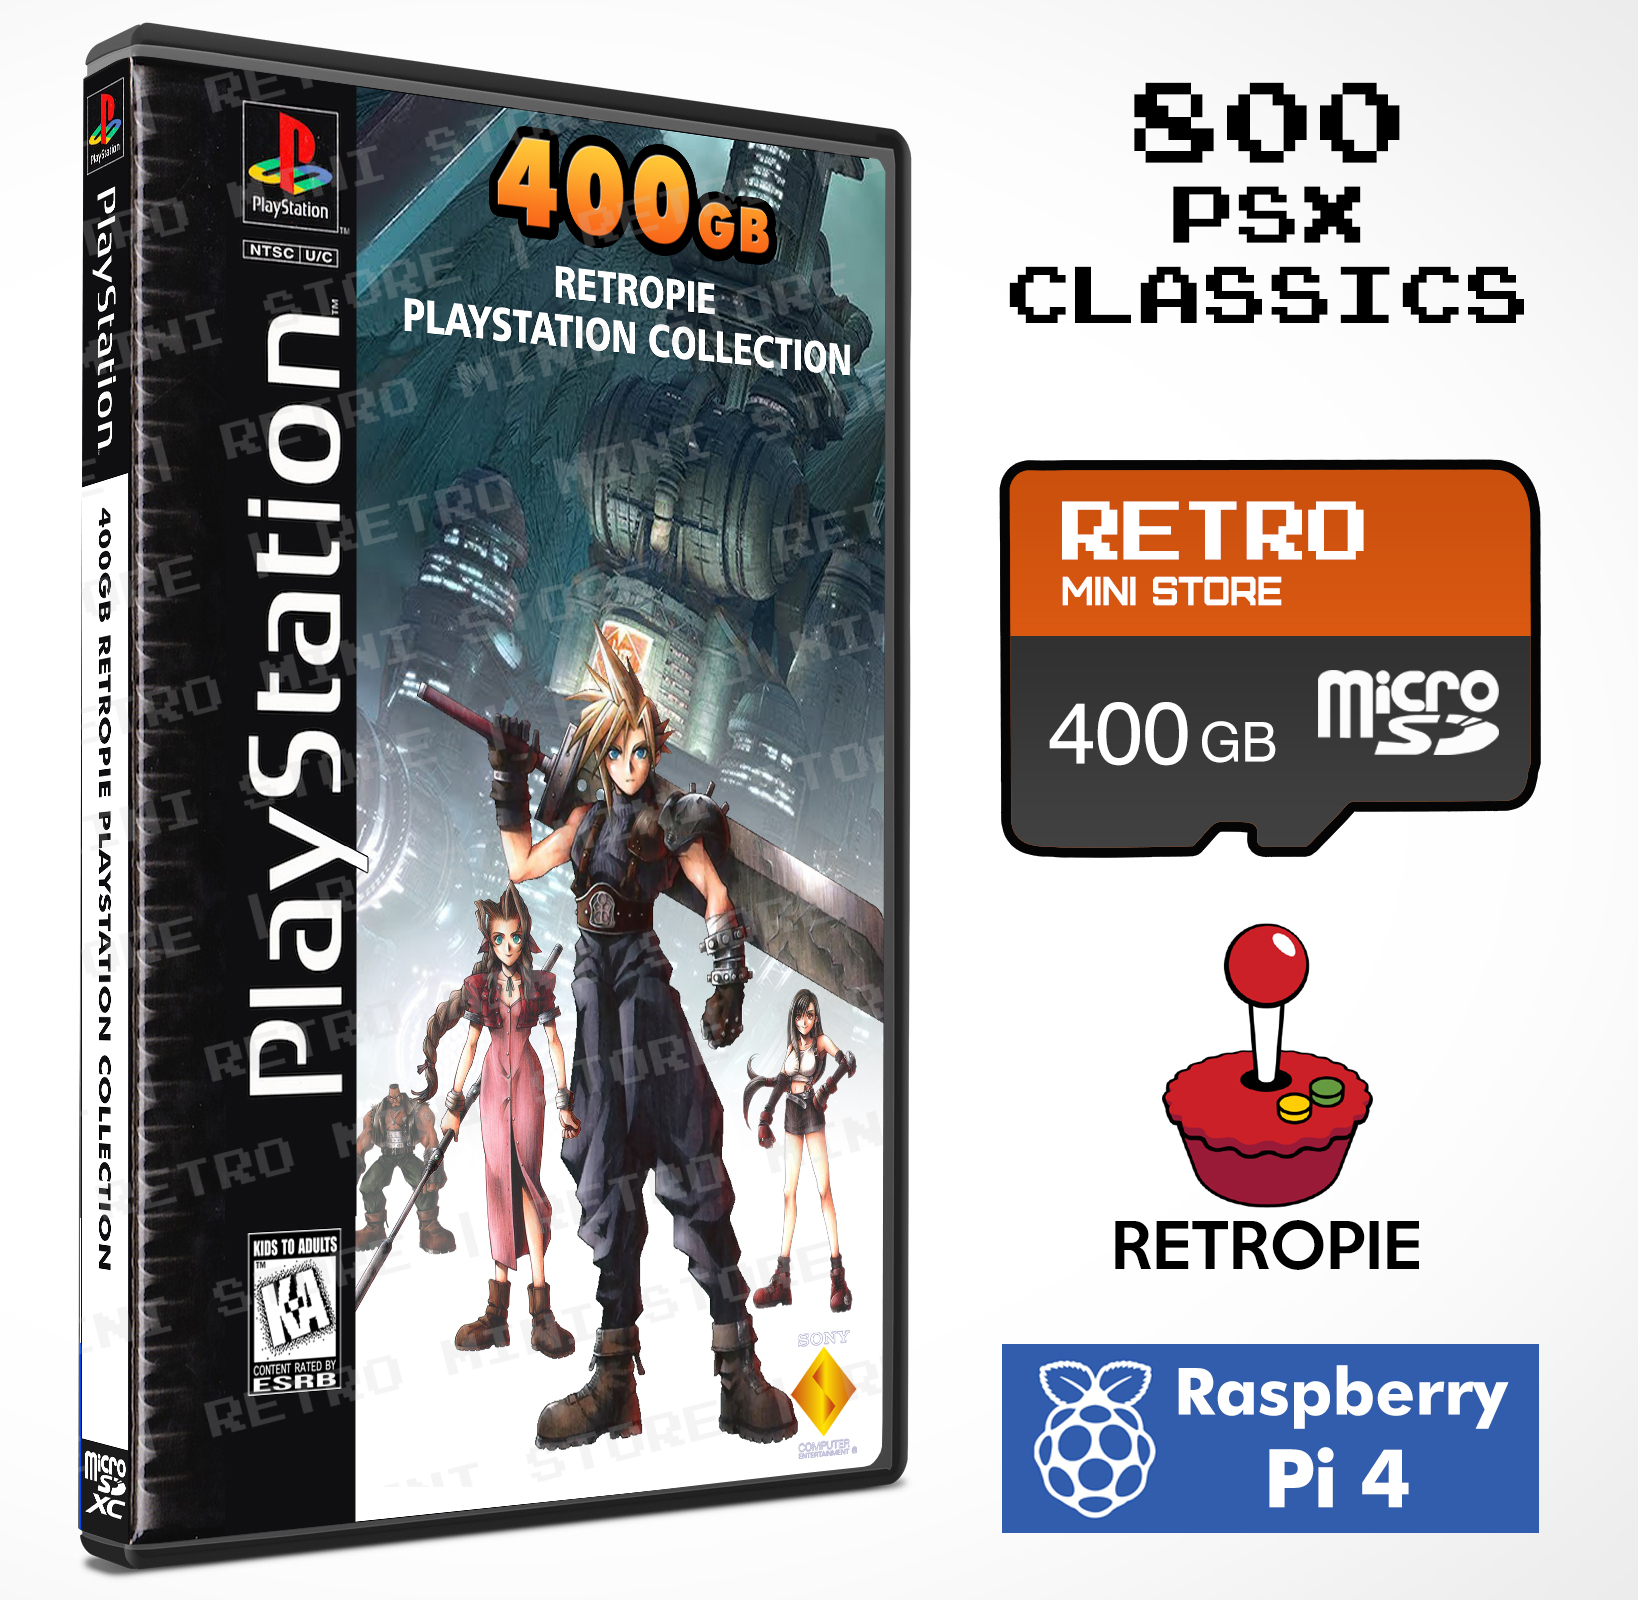 PlayStation 400 GB Retropie microSD Card 800 Games Pre-loaded for Raspberry 4 Store